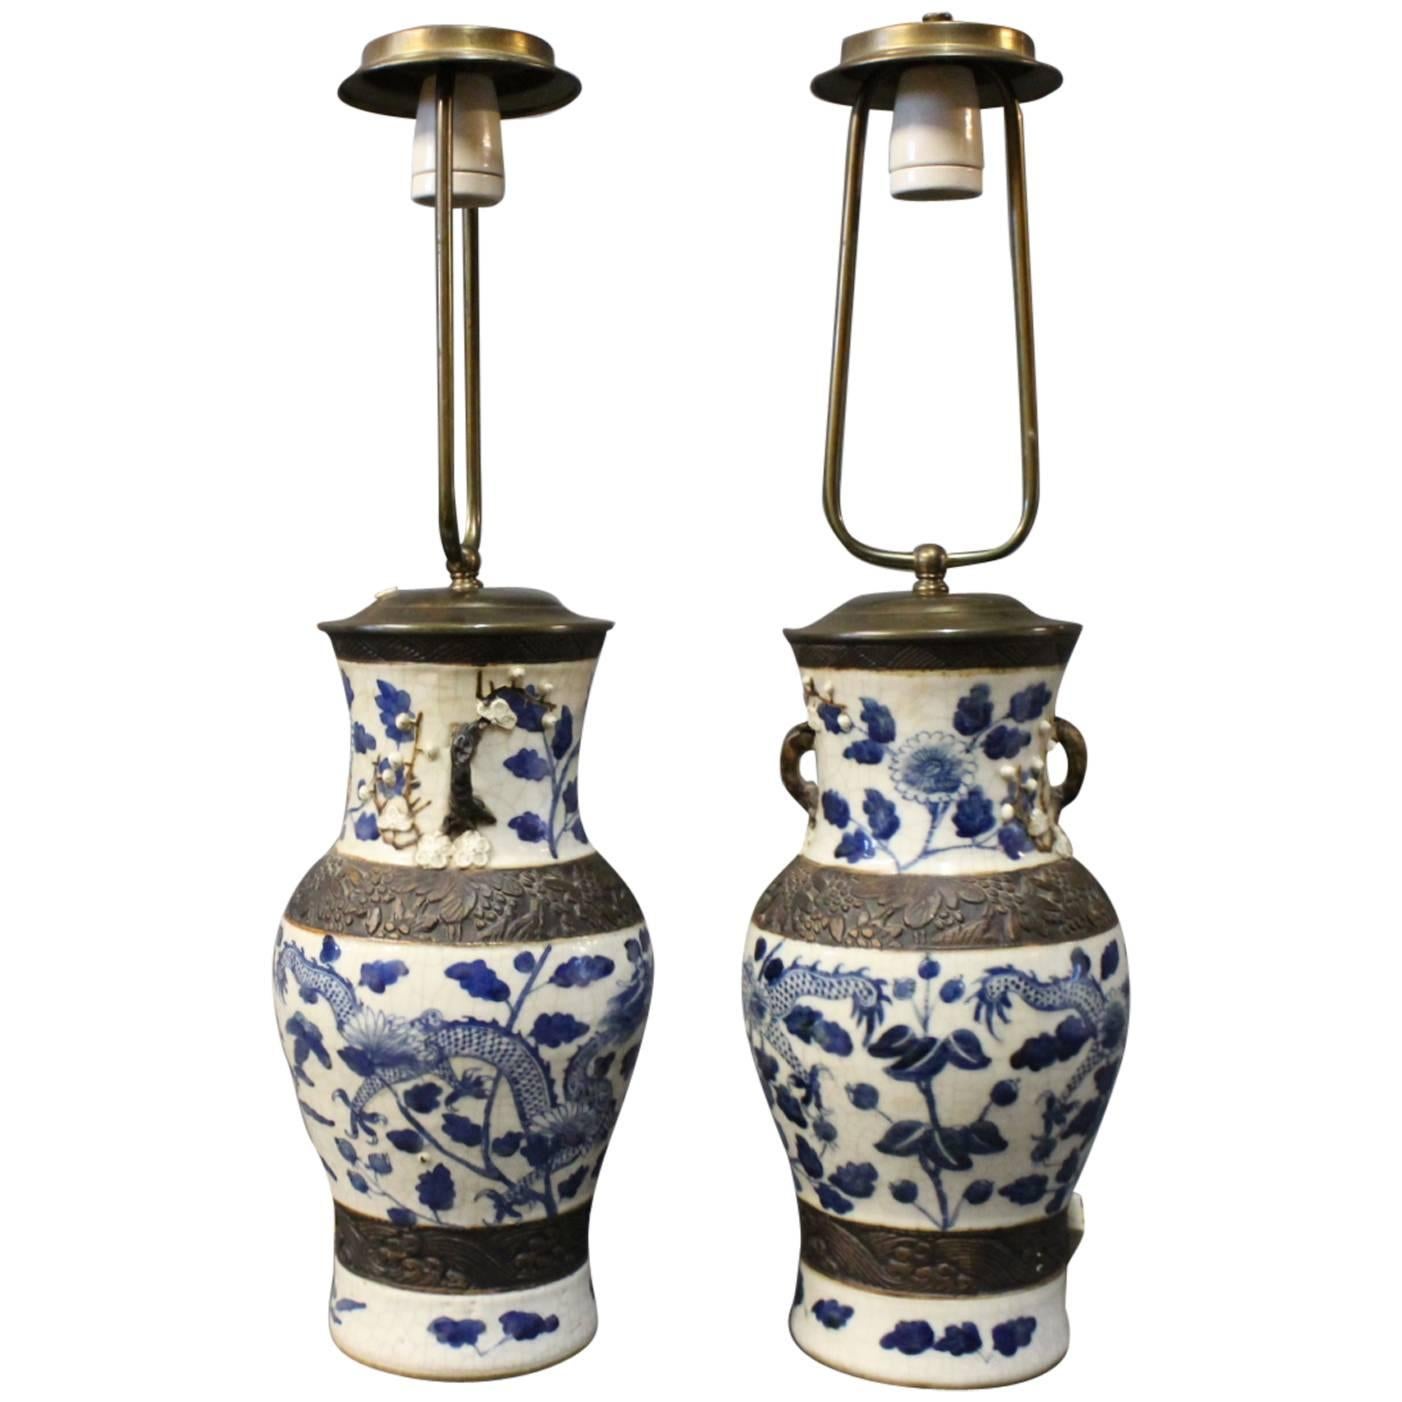 Pair of Chineese Porcelain Table Lamps, circa 1920s